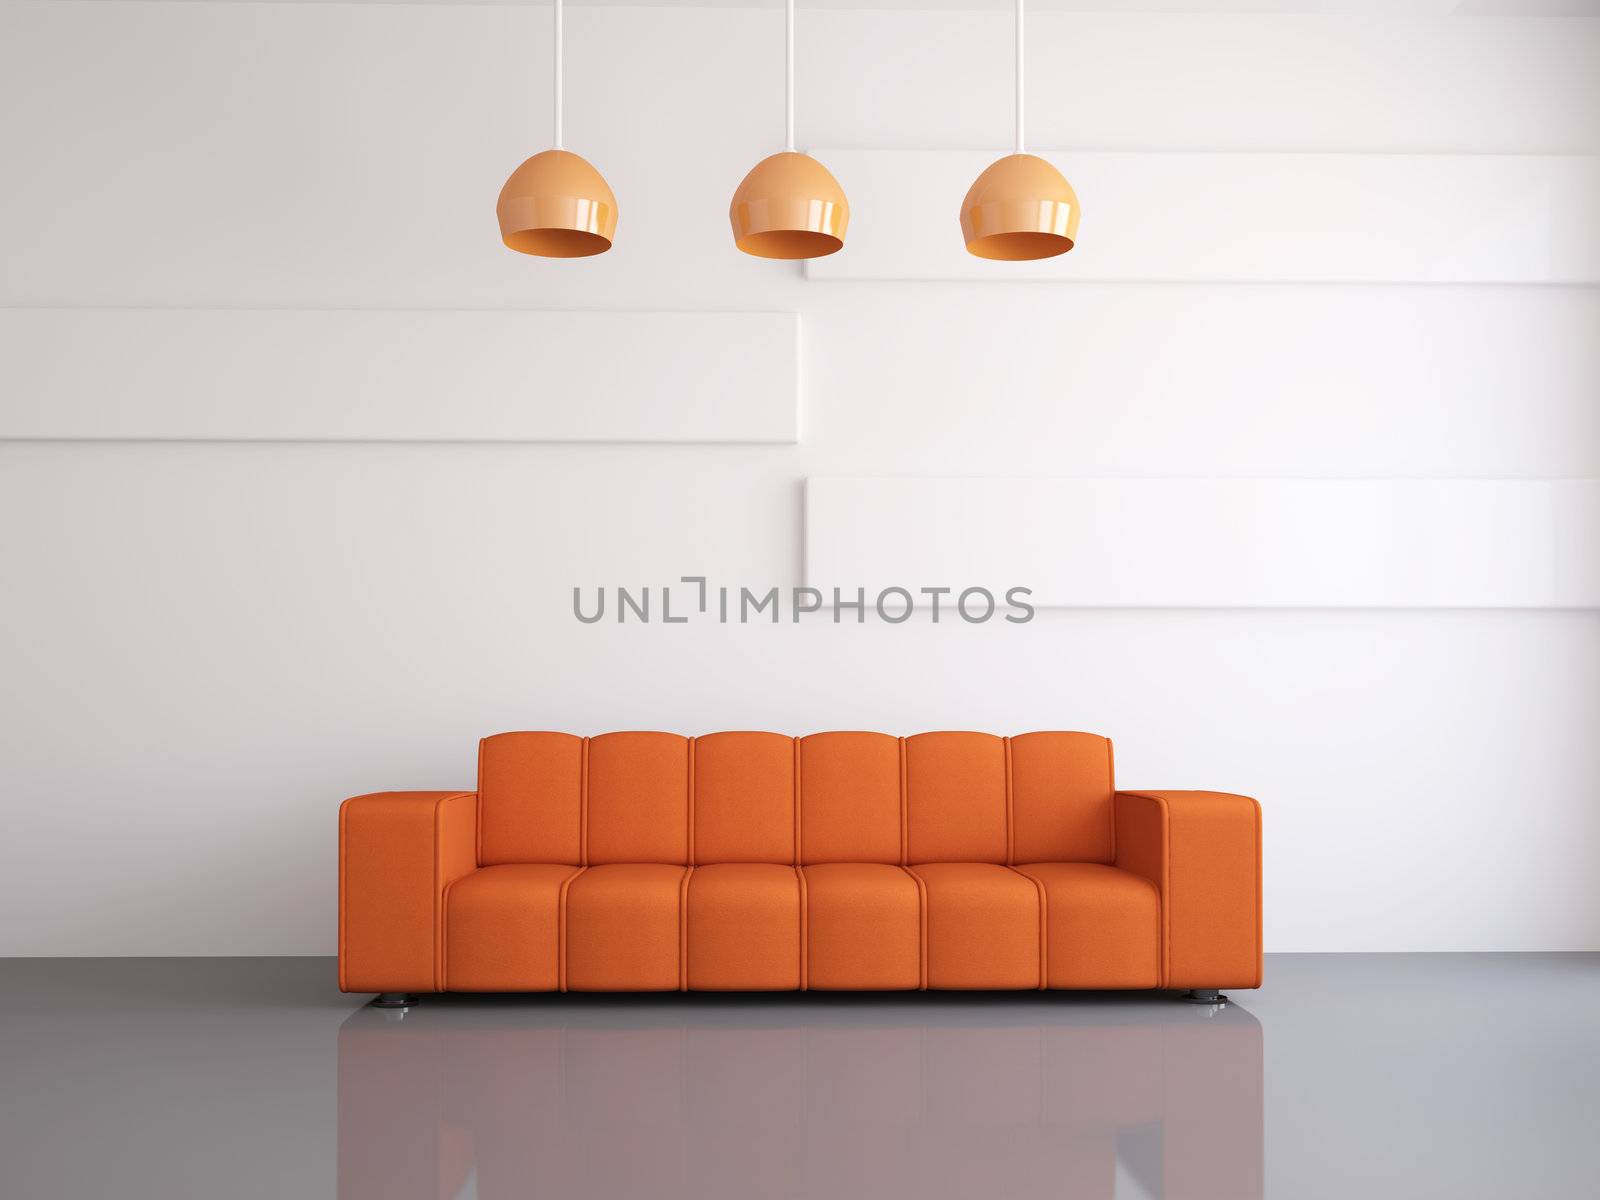 Interior of a room with an orange sofa